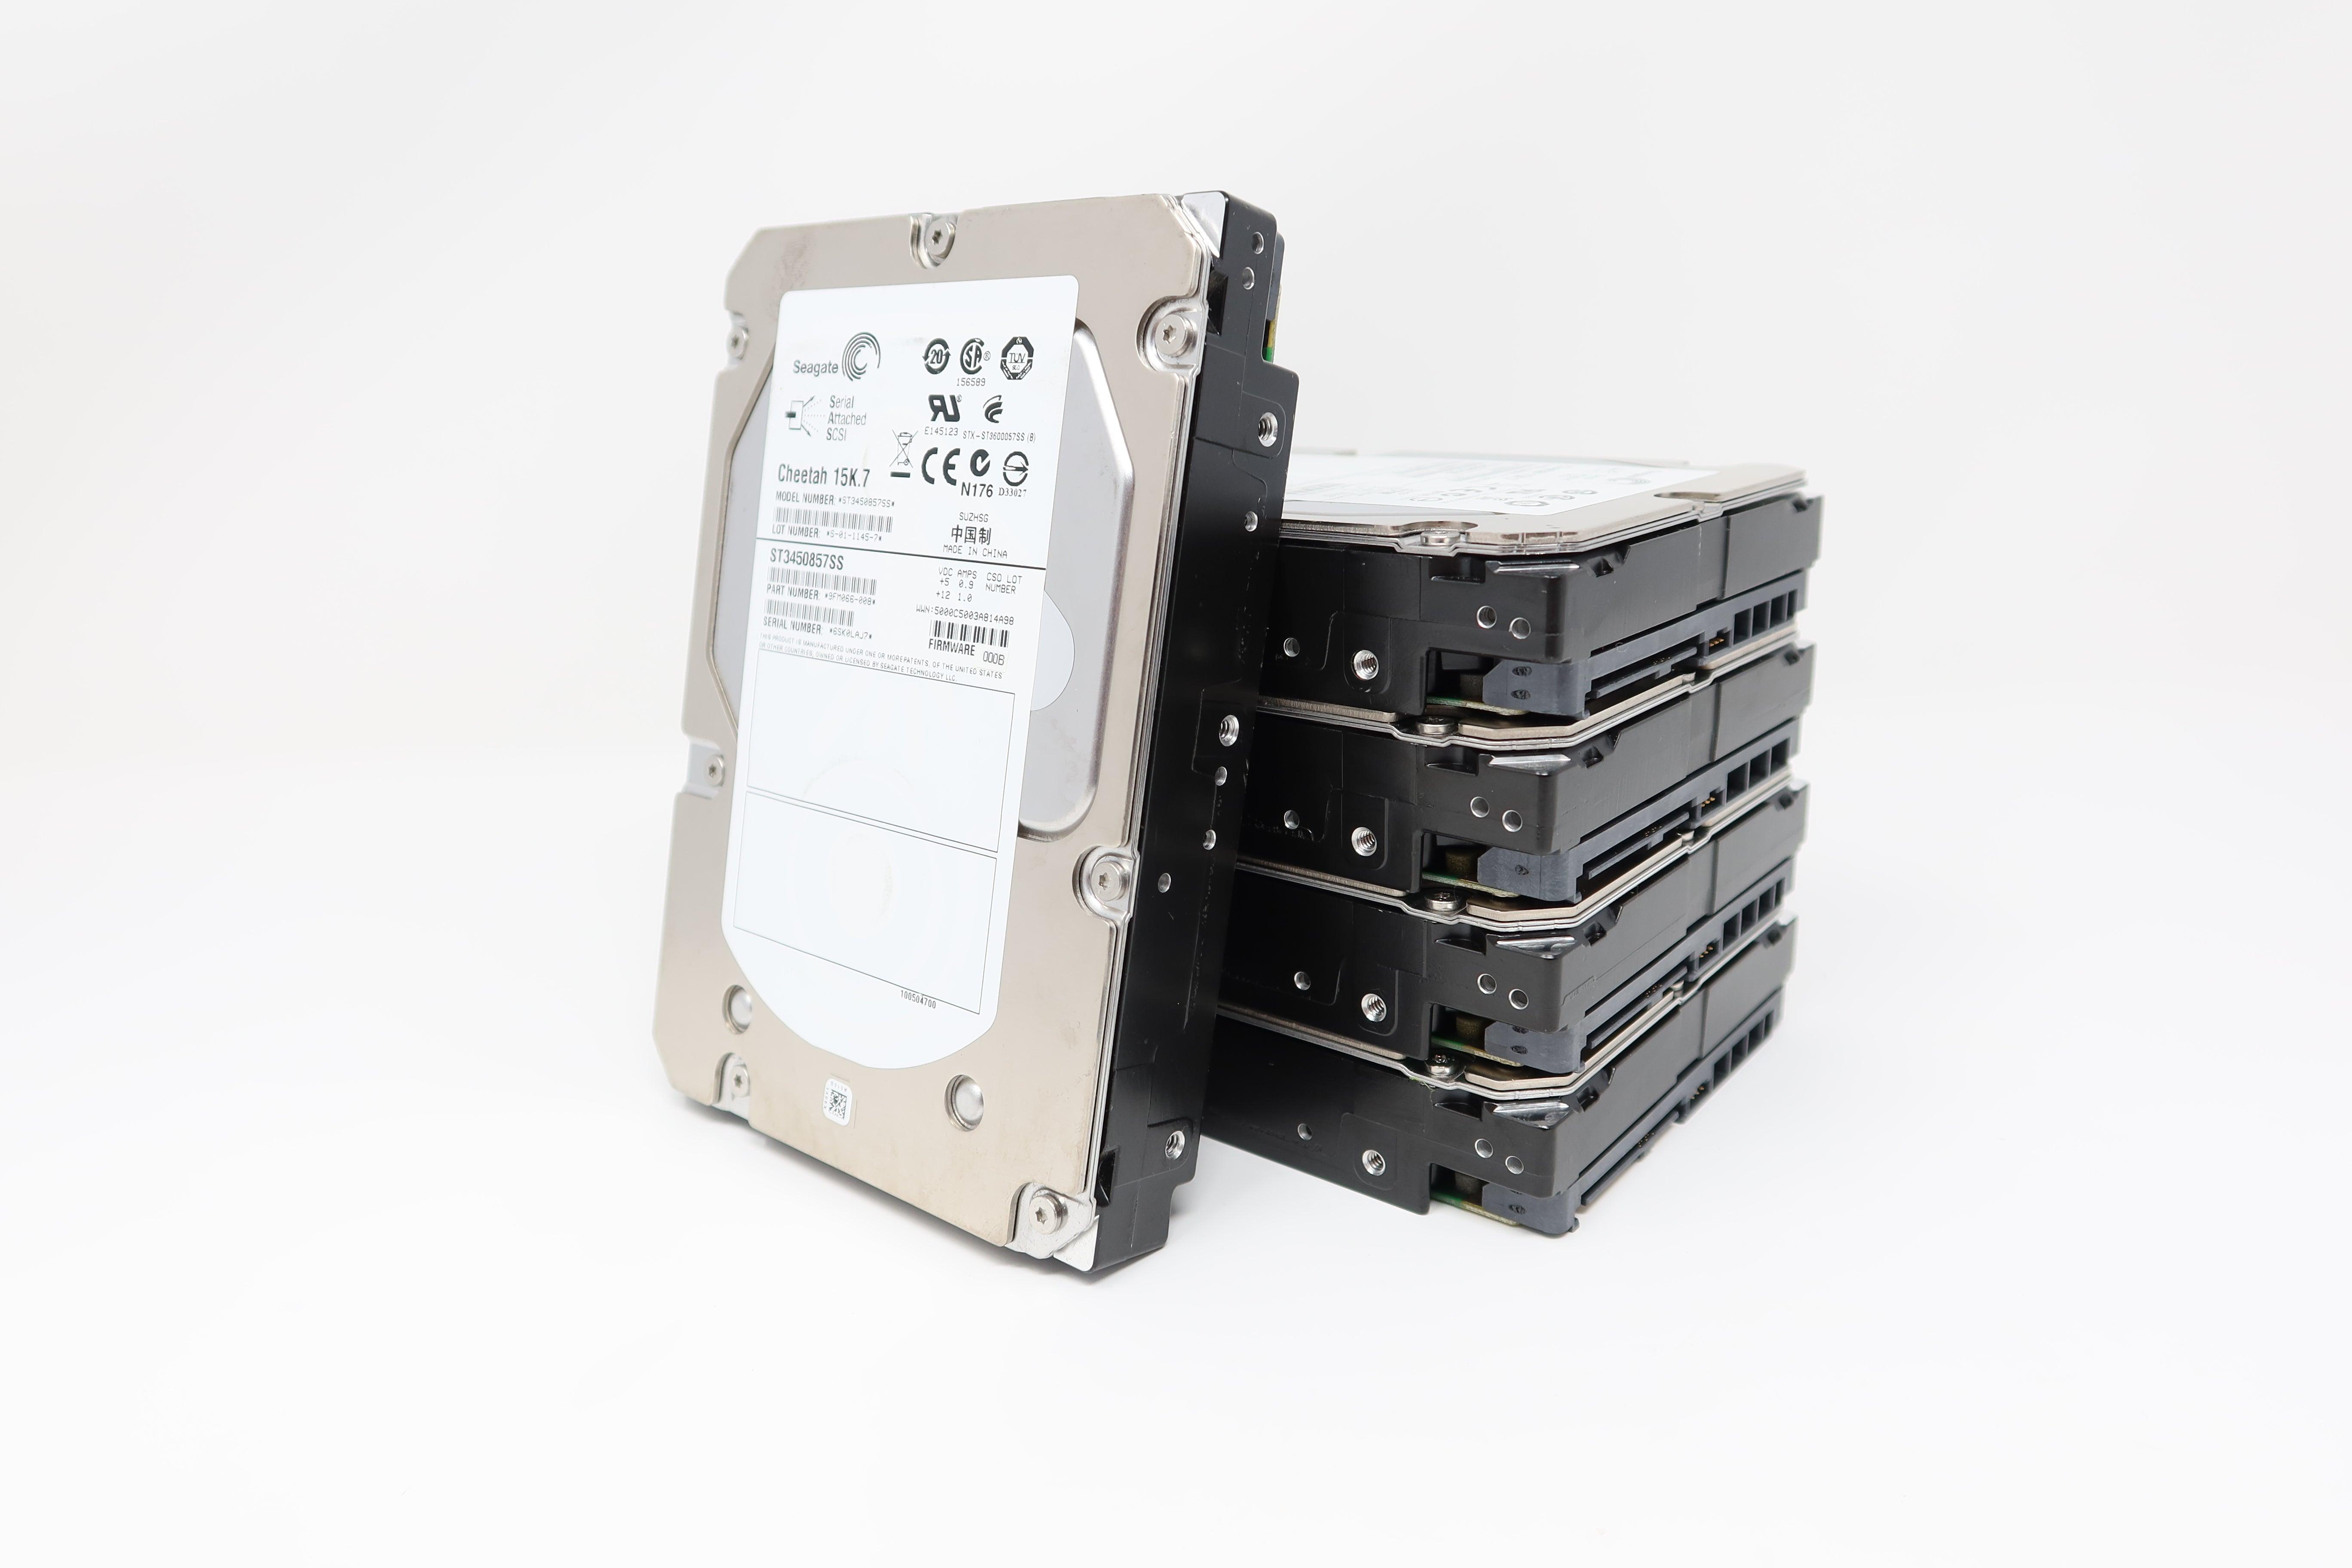 Seagate Cheetah ST3450857SS 450GB 15K SAS 3.5IN (Lot of 5) Drives